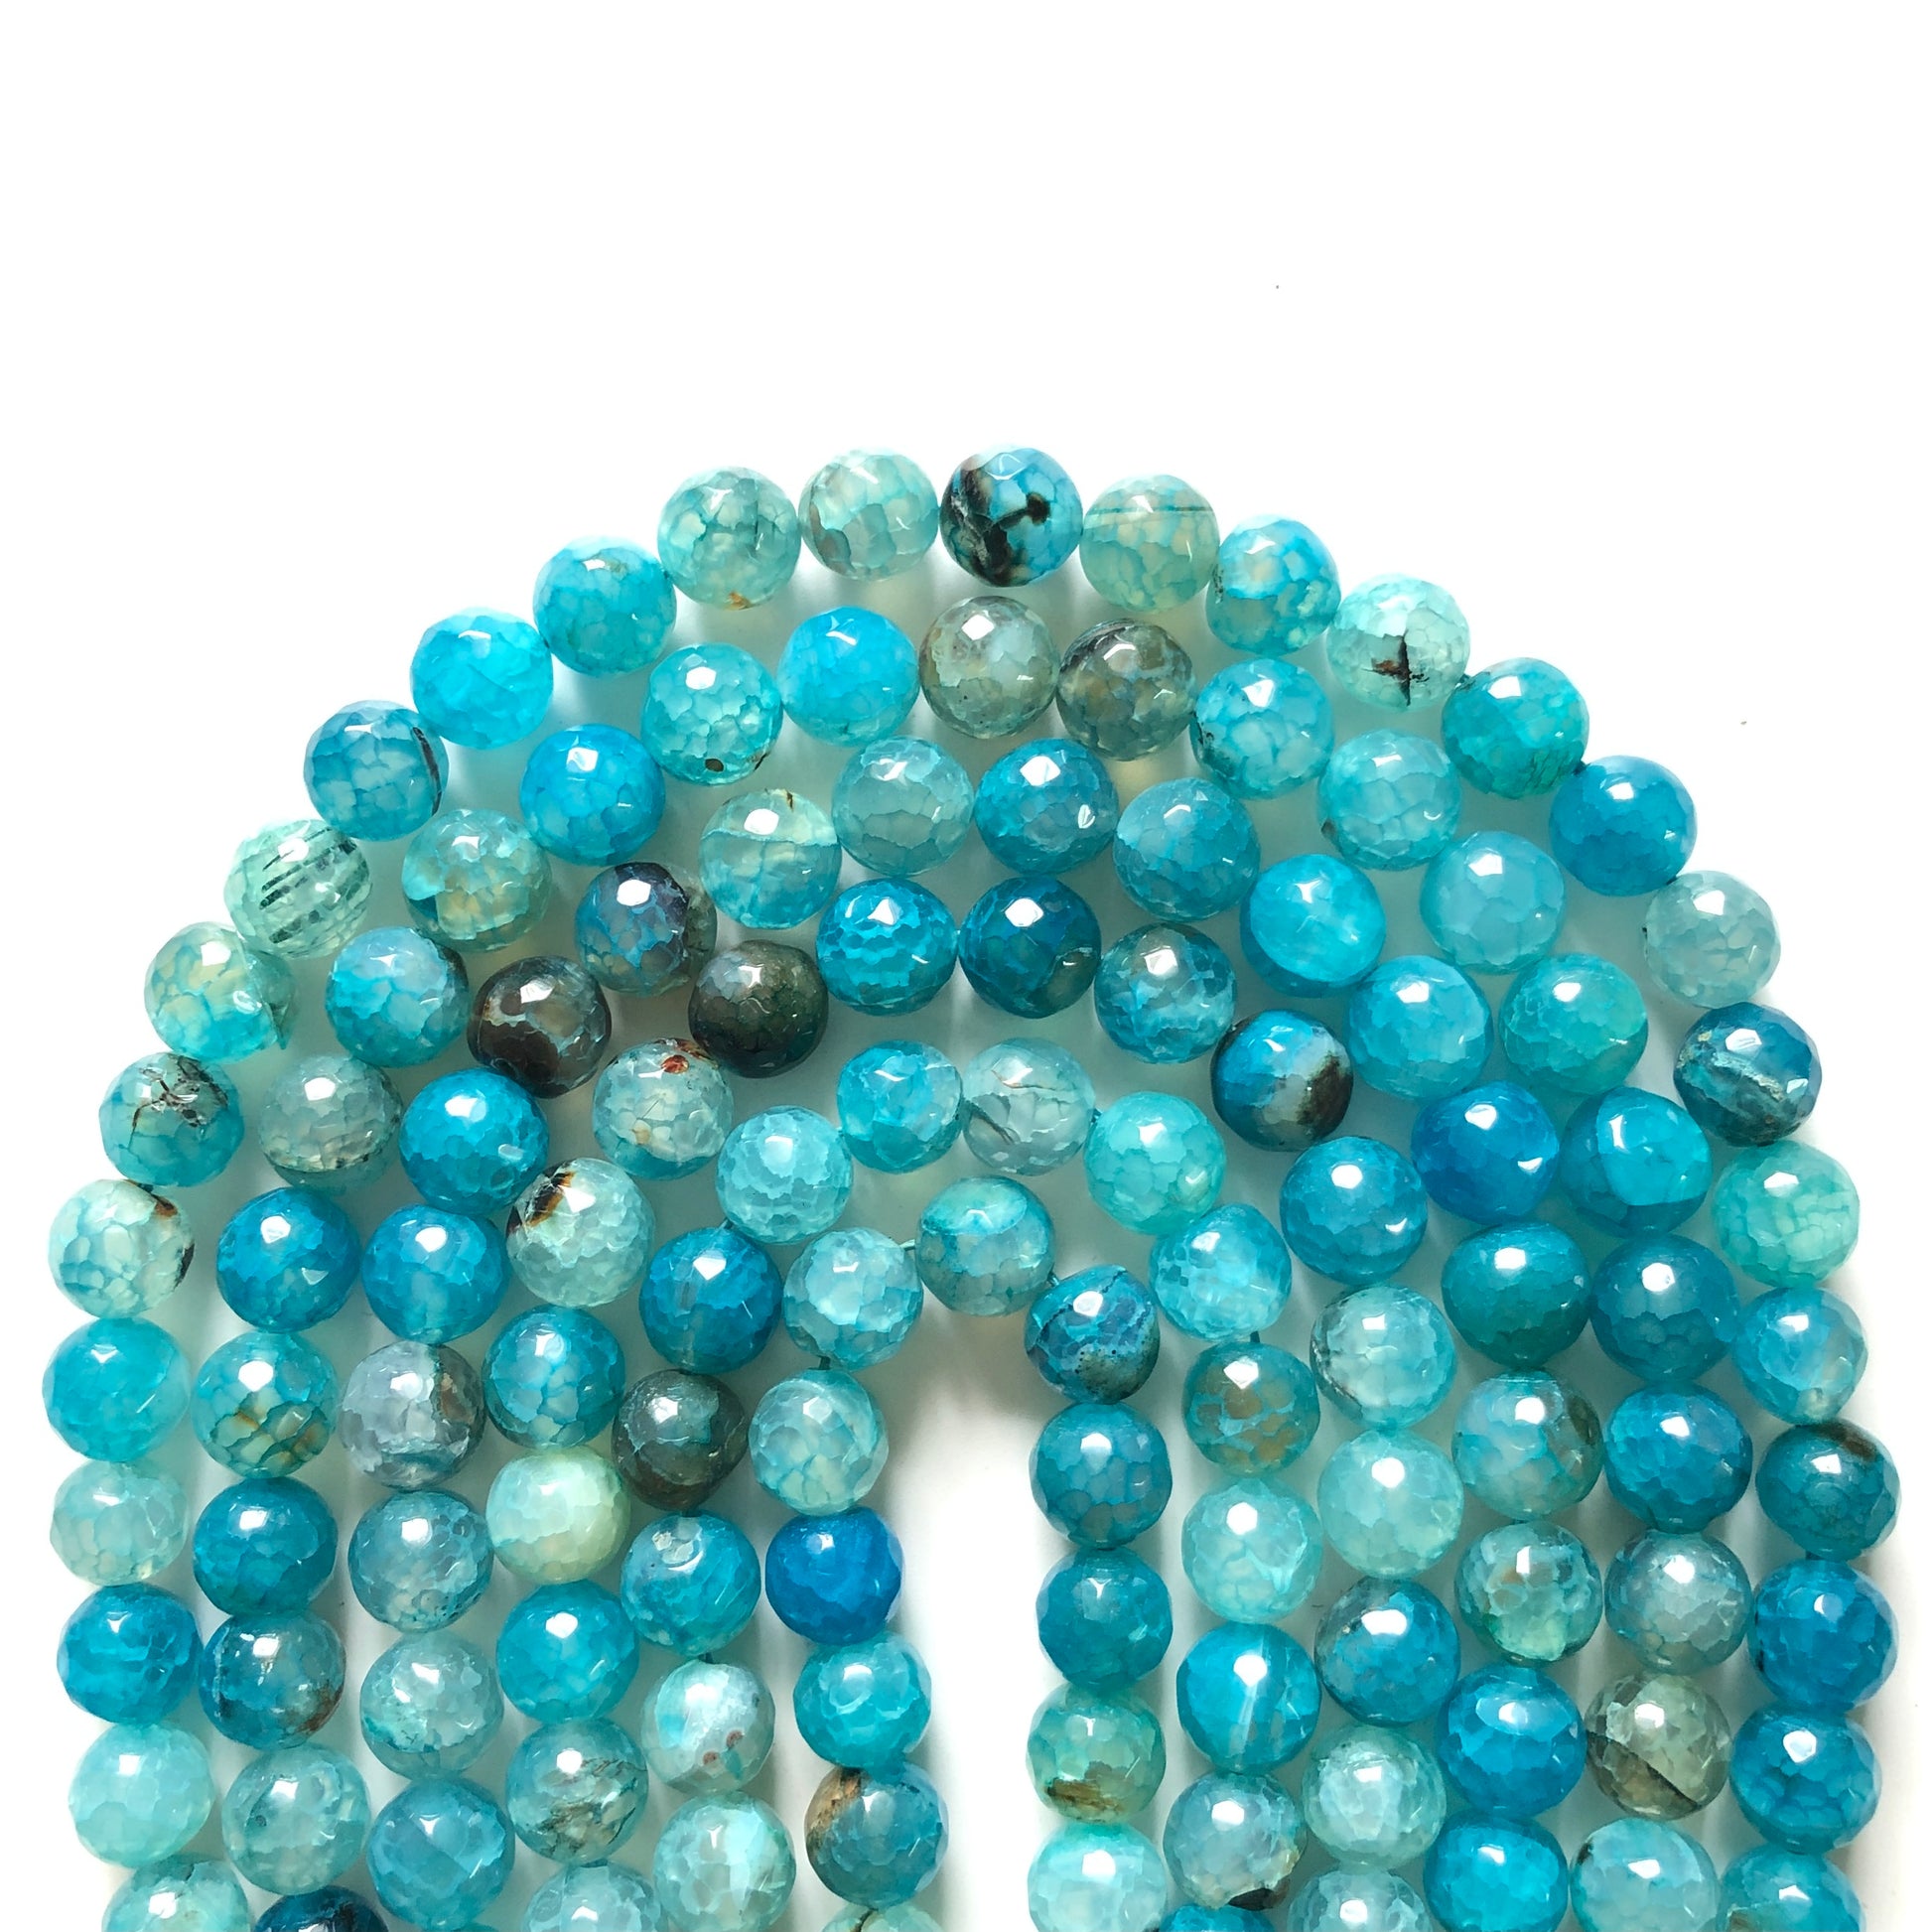 2 Strands/lot 10mm Blue Dragon Agate Faceted Stone Beads 10mm Stone Beads Faceted Agate Beads Charms Beads Beyond